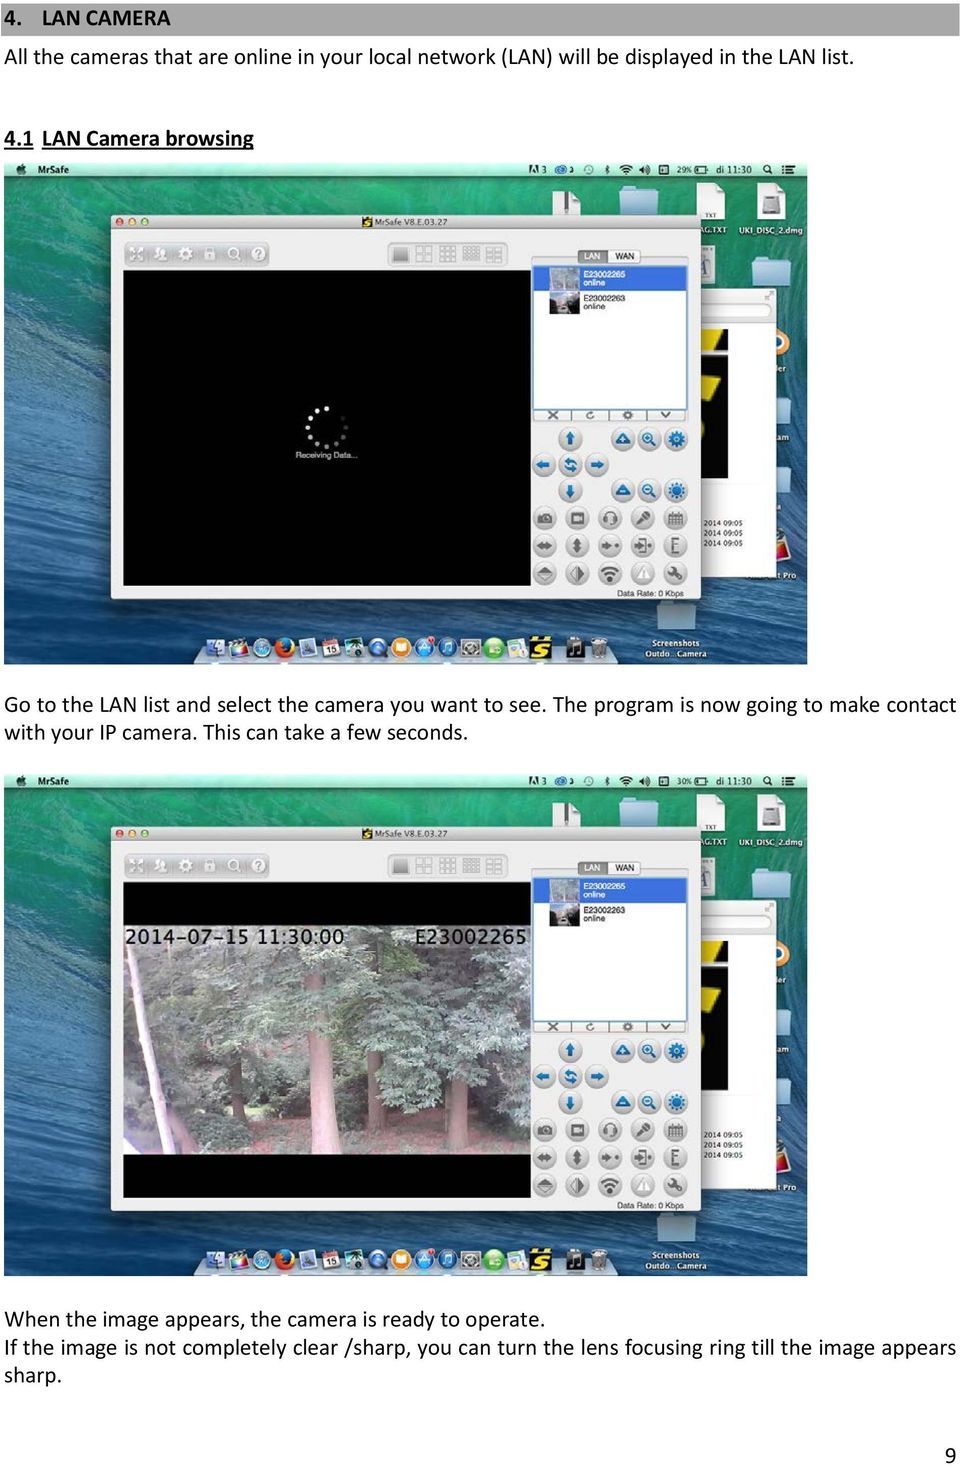 The program is now going to make contact with your IP camera. This can take a few seconds.